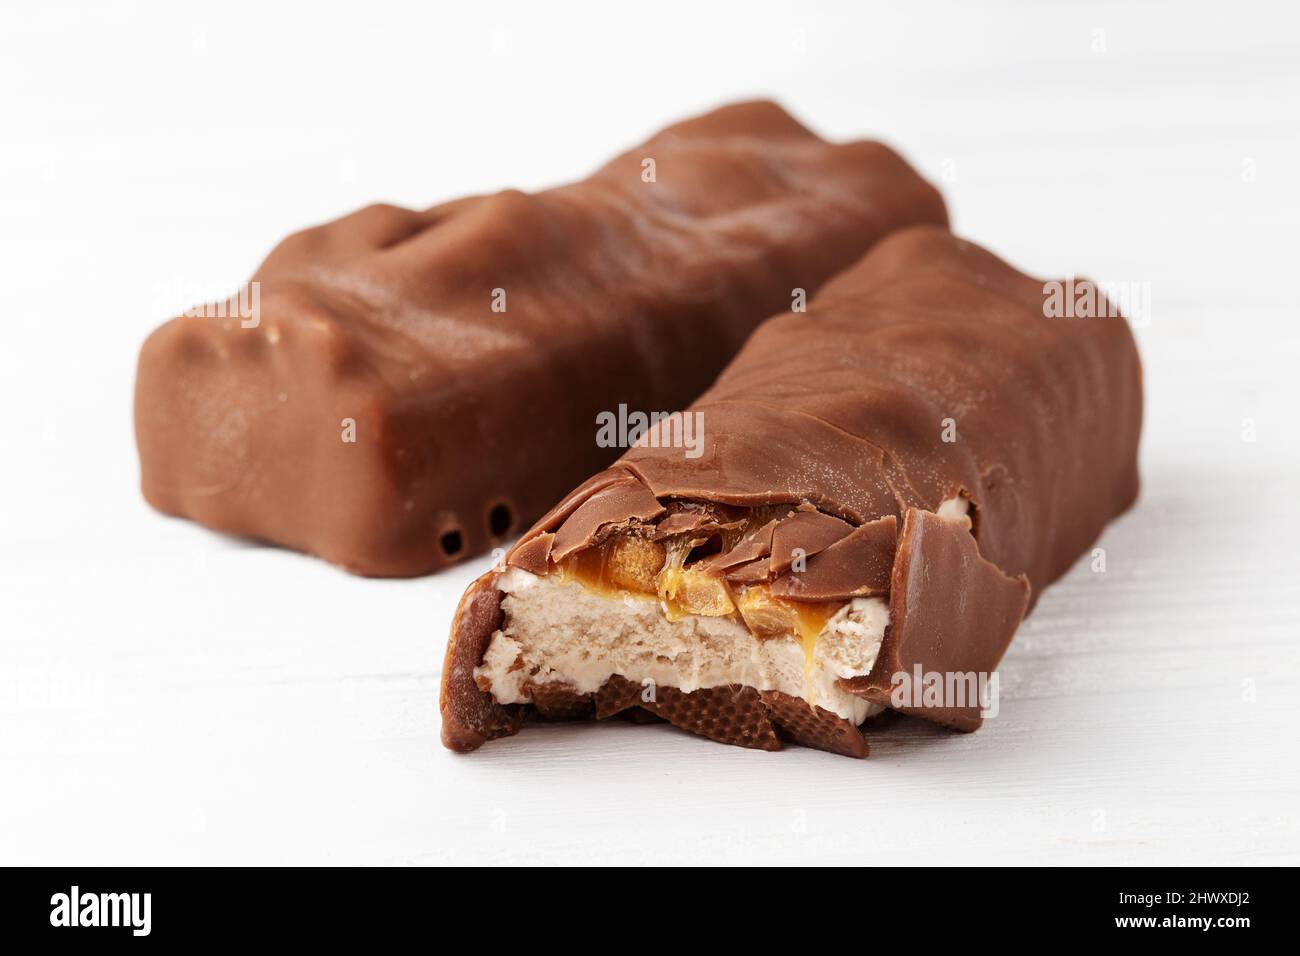 Two chocolate ice cream bars with caramel and peanuts on white background close up macro shot Stock Photo